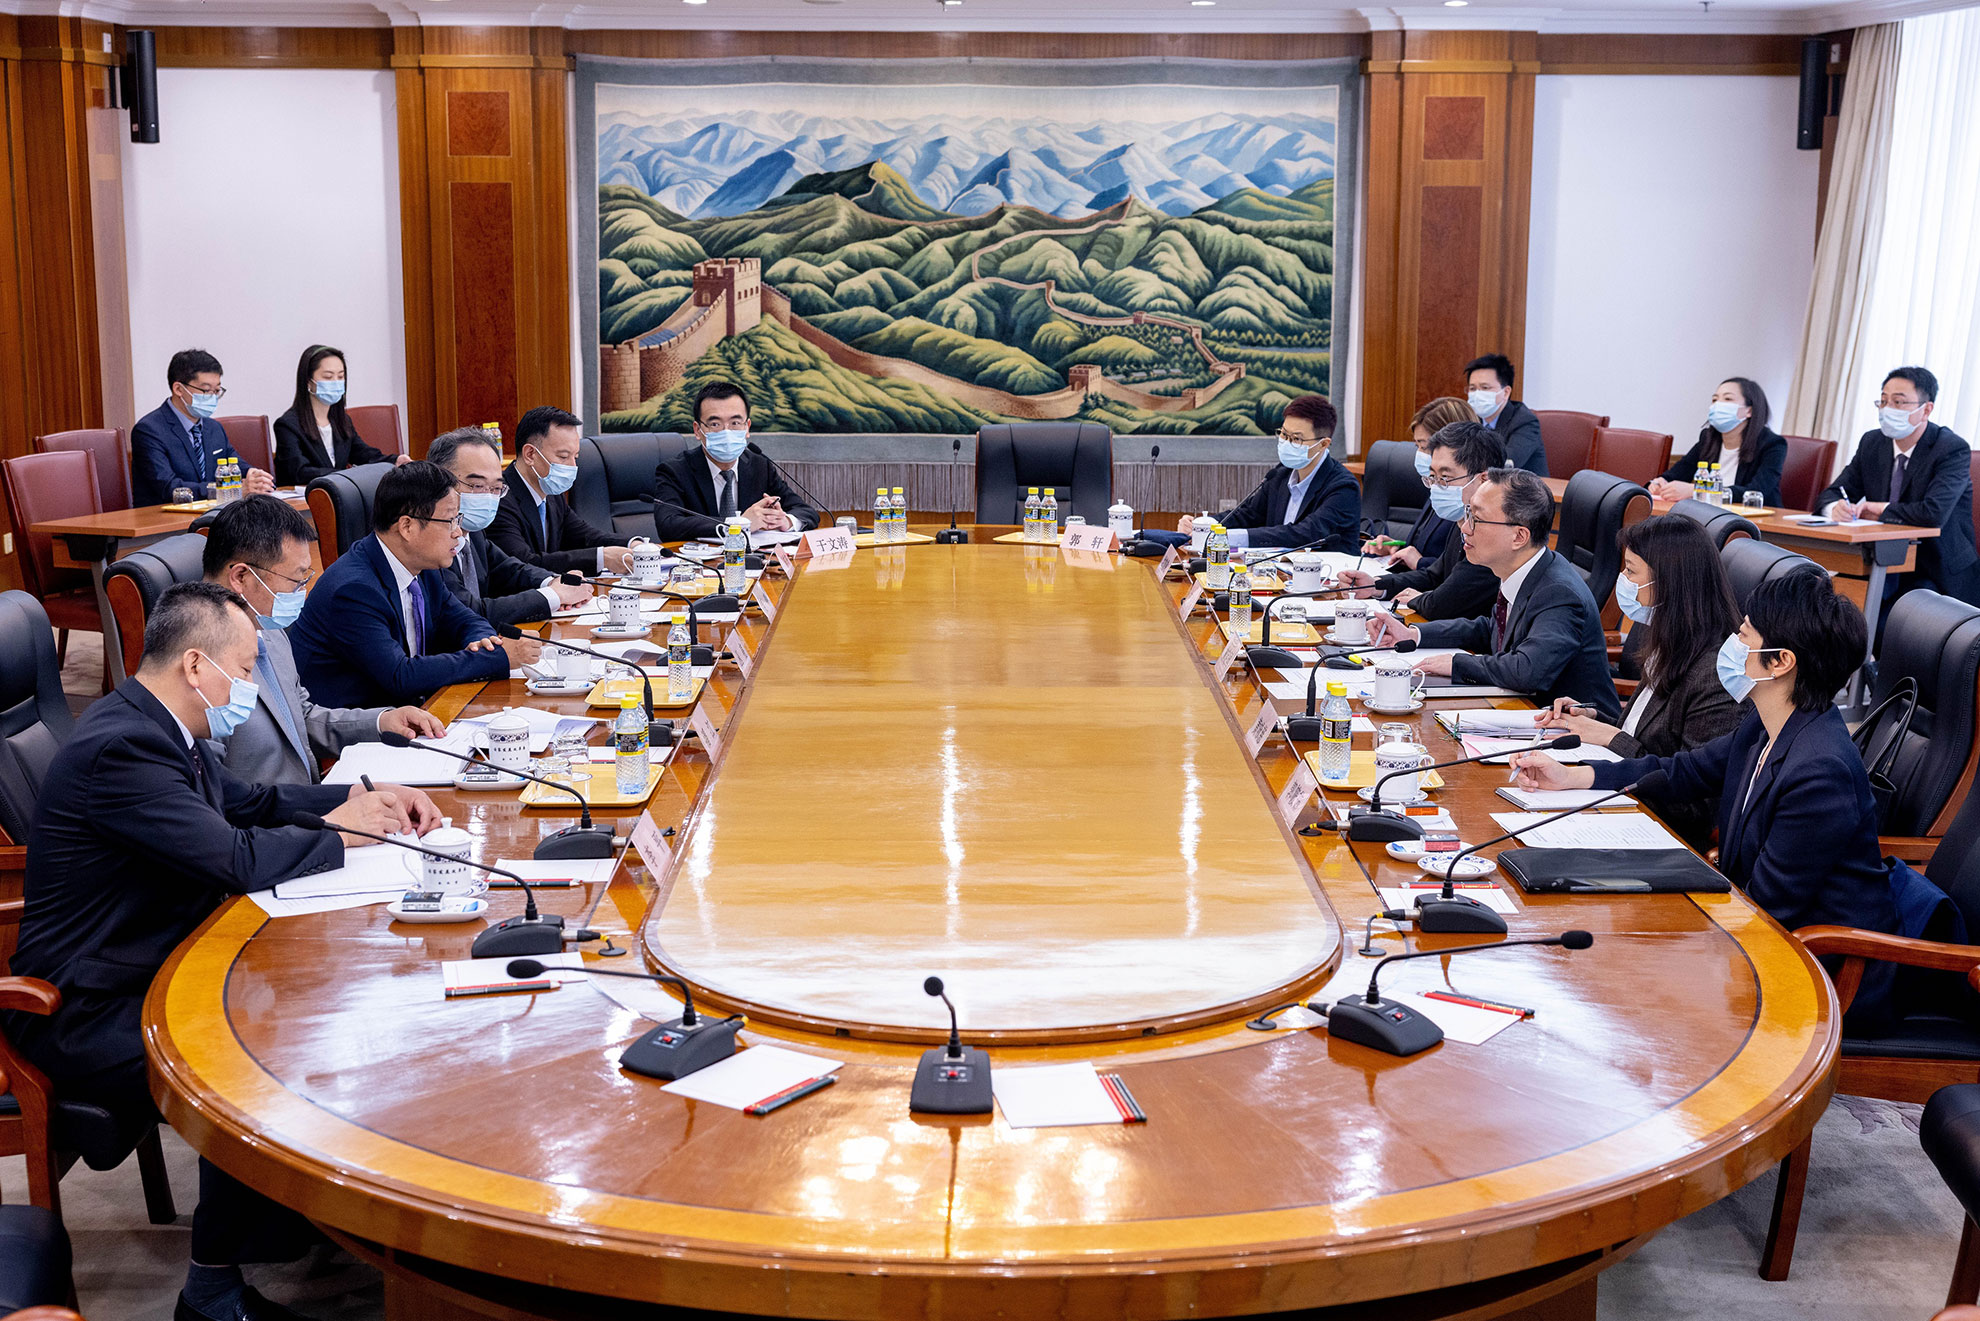 The Secretary for Justice, Mr Paul Lam, SC (third right), meets with Deputy Director of the National Development and Reform Commission Mr Cong Liang (third left) this afternoon (May 30) in Beijing. Photo shows both sides in the meeting.